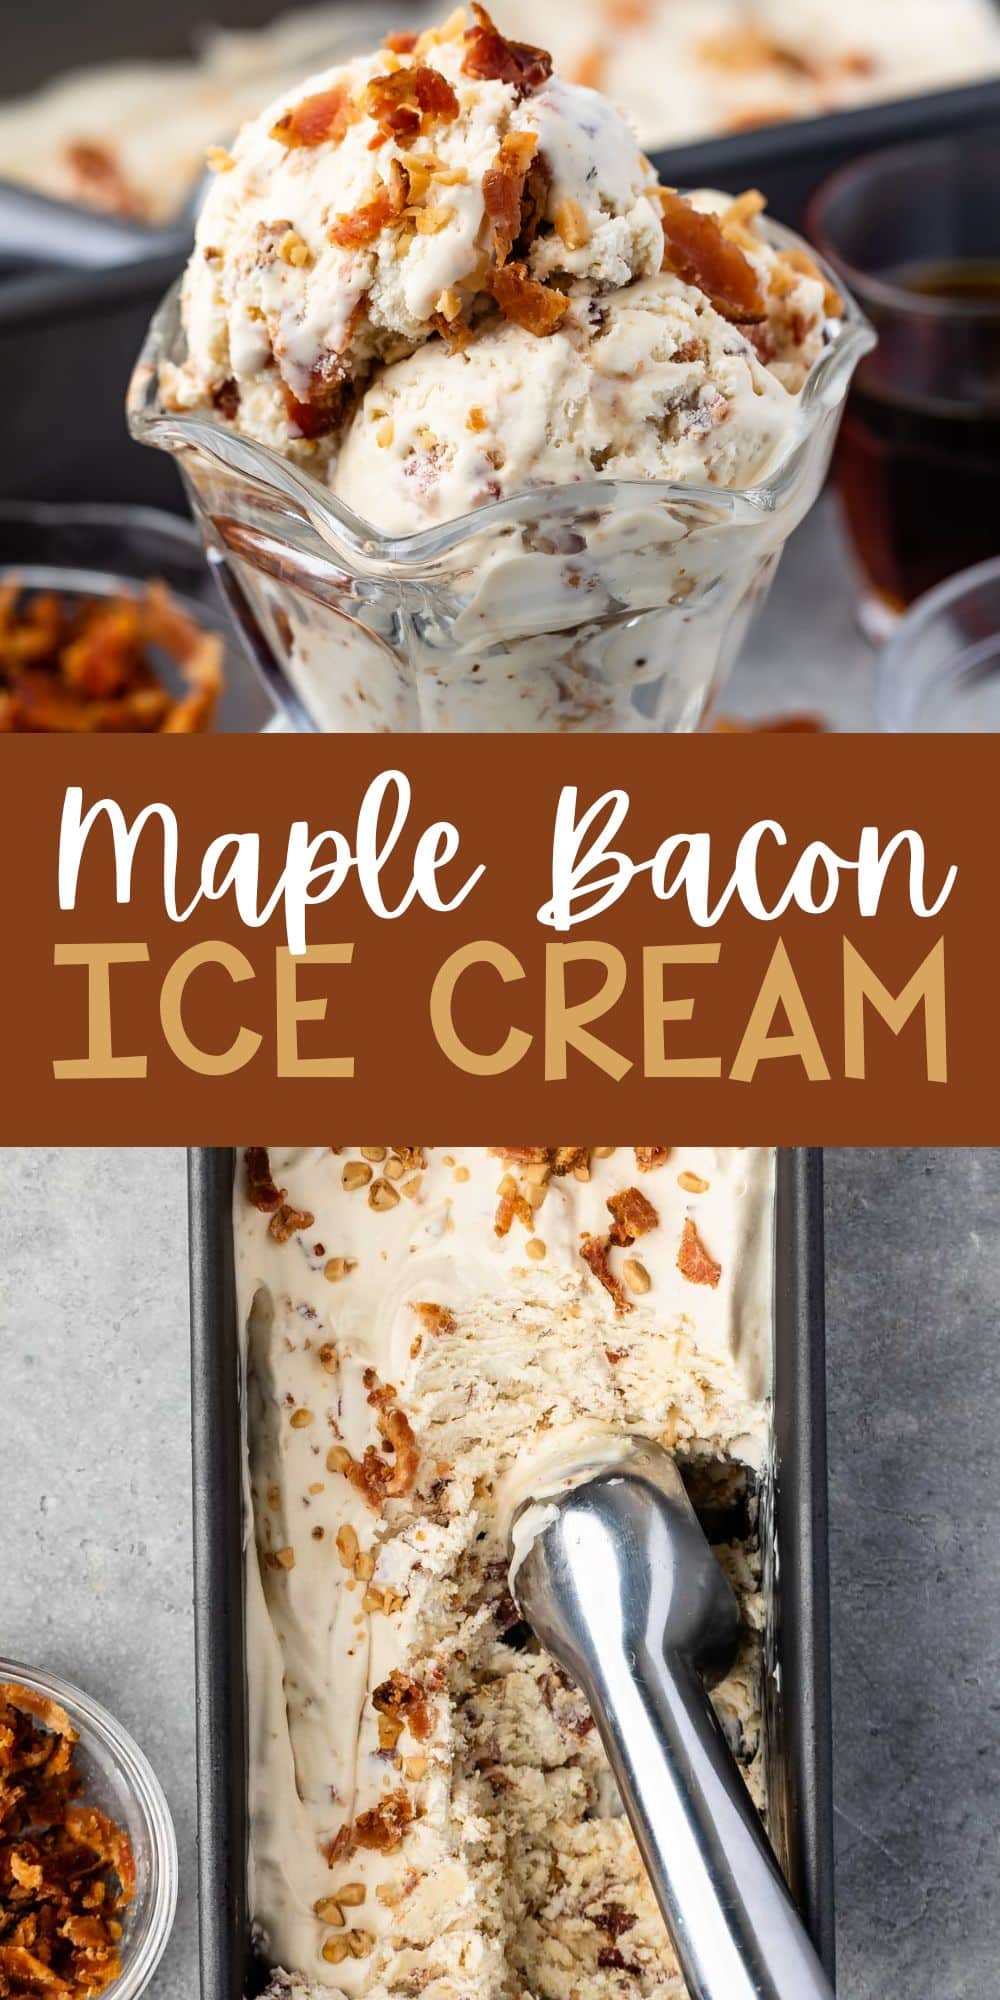 two photos of ice cream in a clear ice cream glass topped with bacon with words on the image.